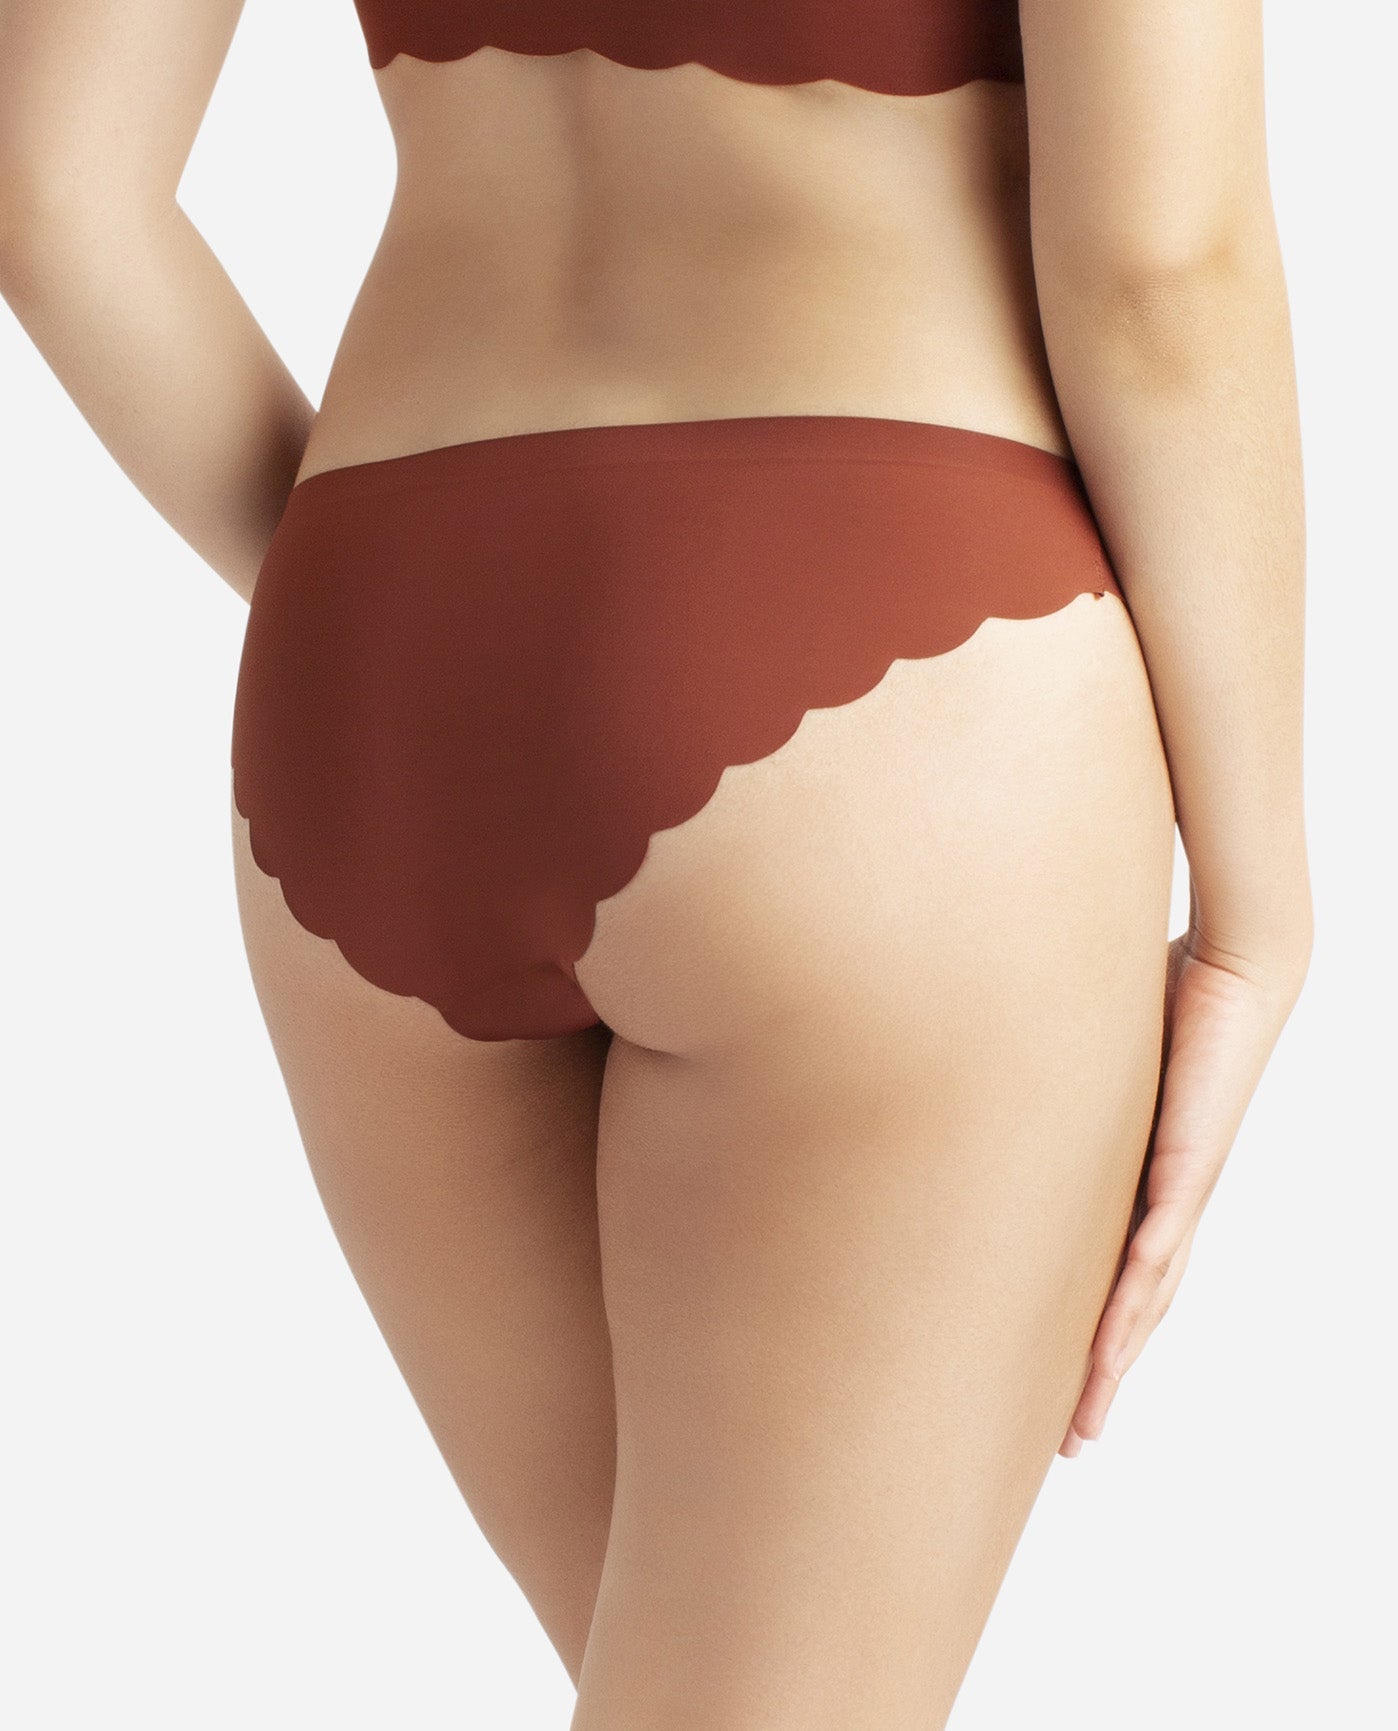 Women's Underwear with Thin Ribbon and Wooden Ear Edge Satin